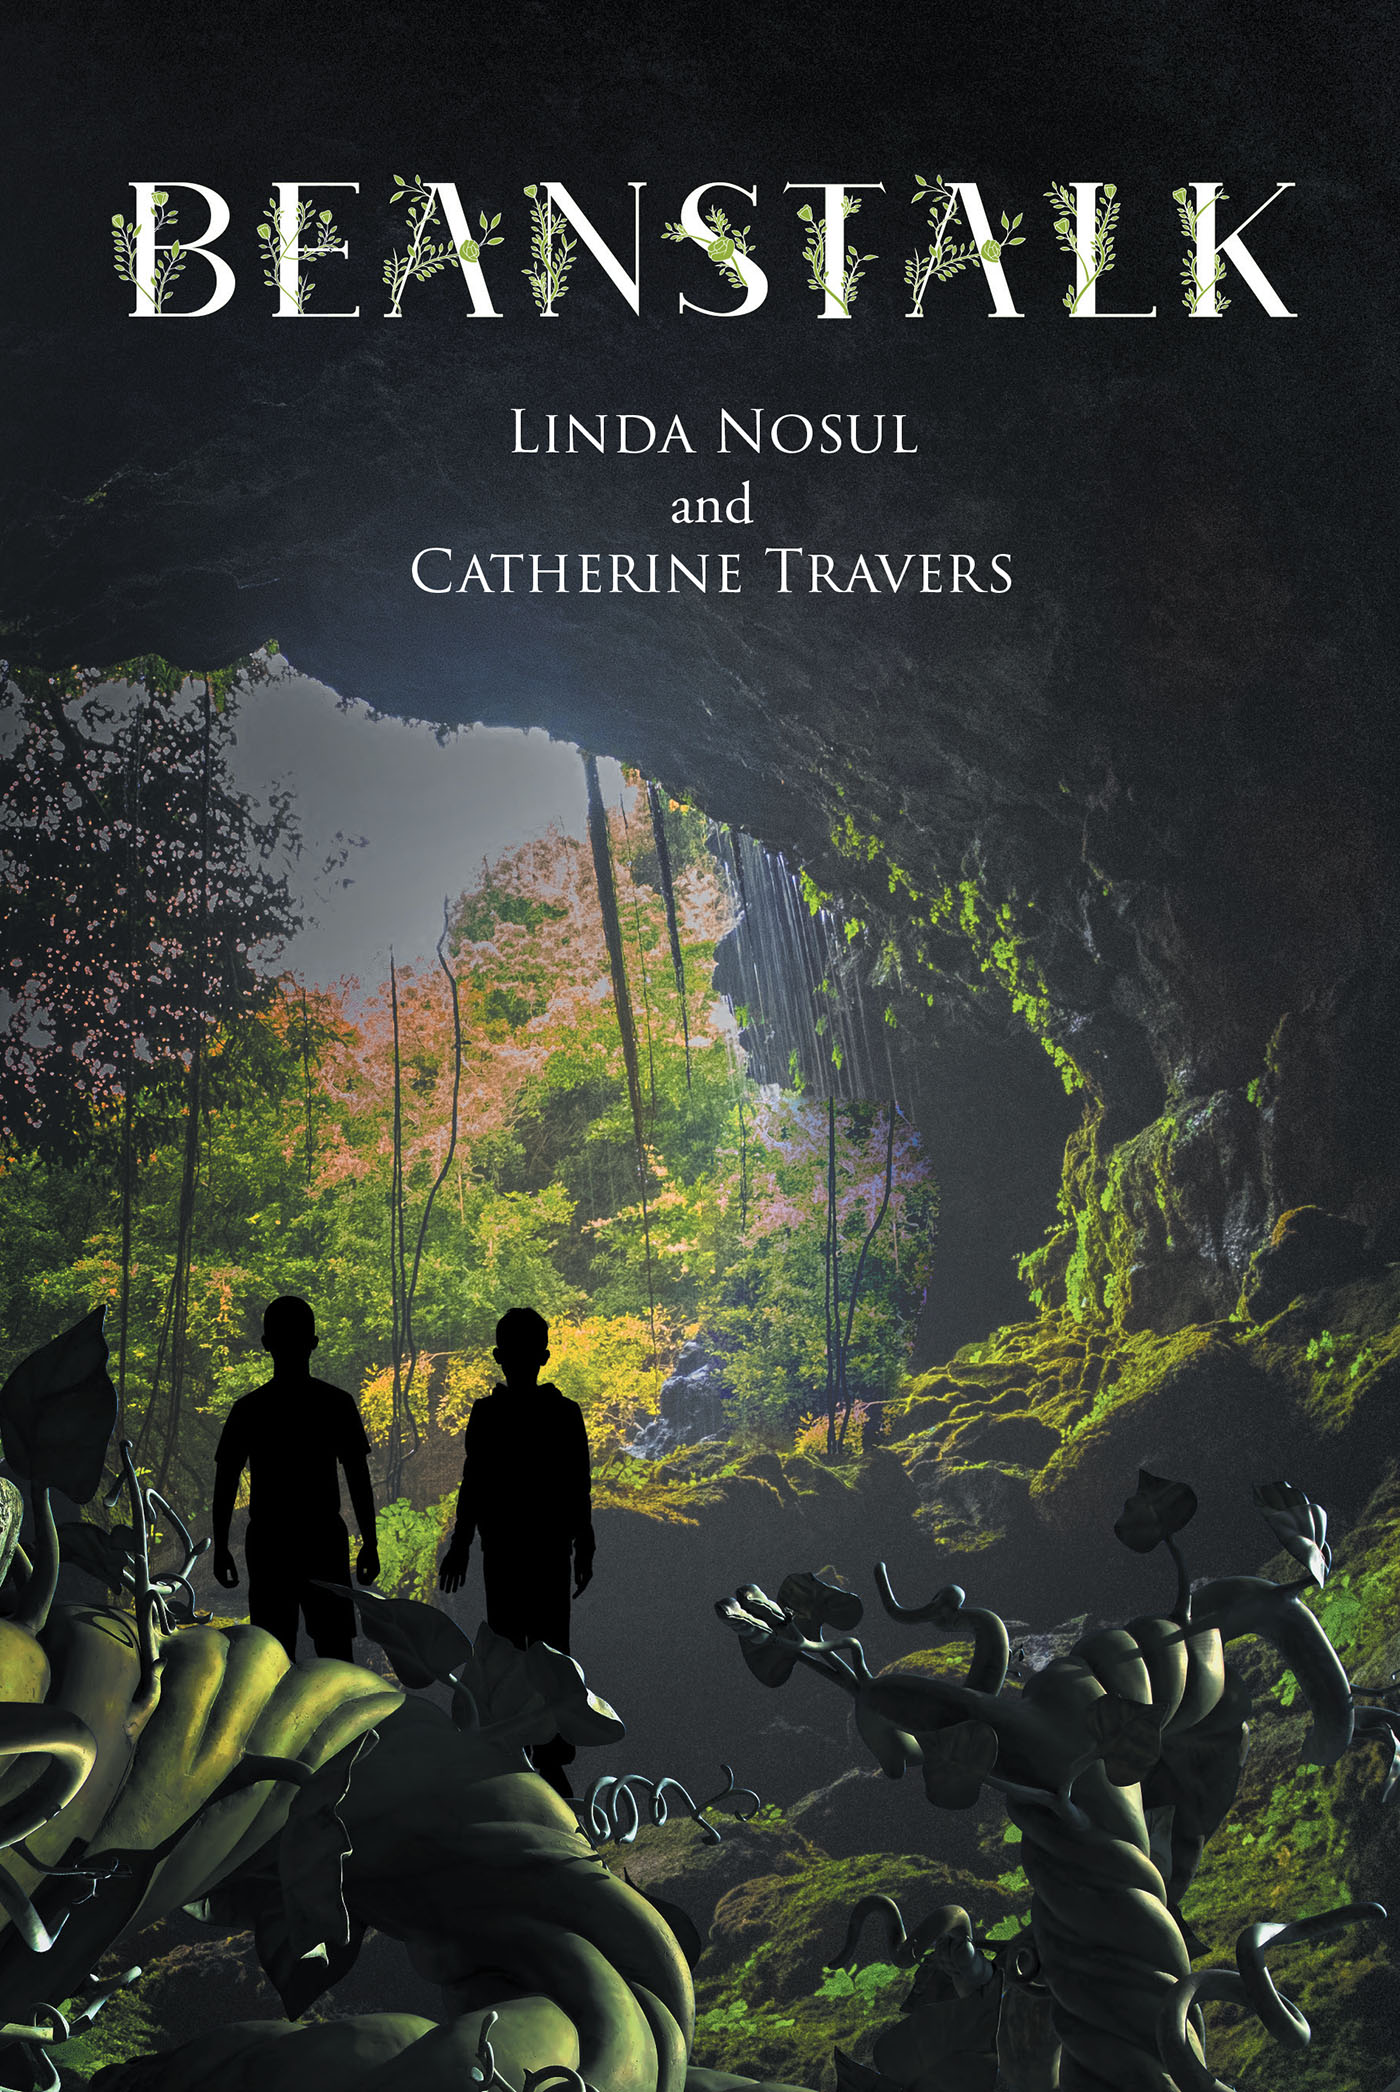 Linda Nosul and Catherine Travers’s New Book, "Beanstalk," is a Gripping and Daring Novel That Tells the Tale of Two Young Boys Who Are Thrust Into a Strange New World